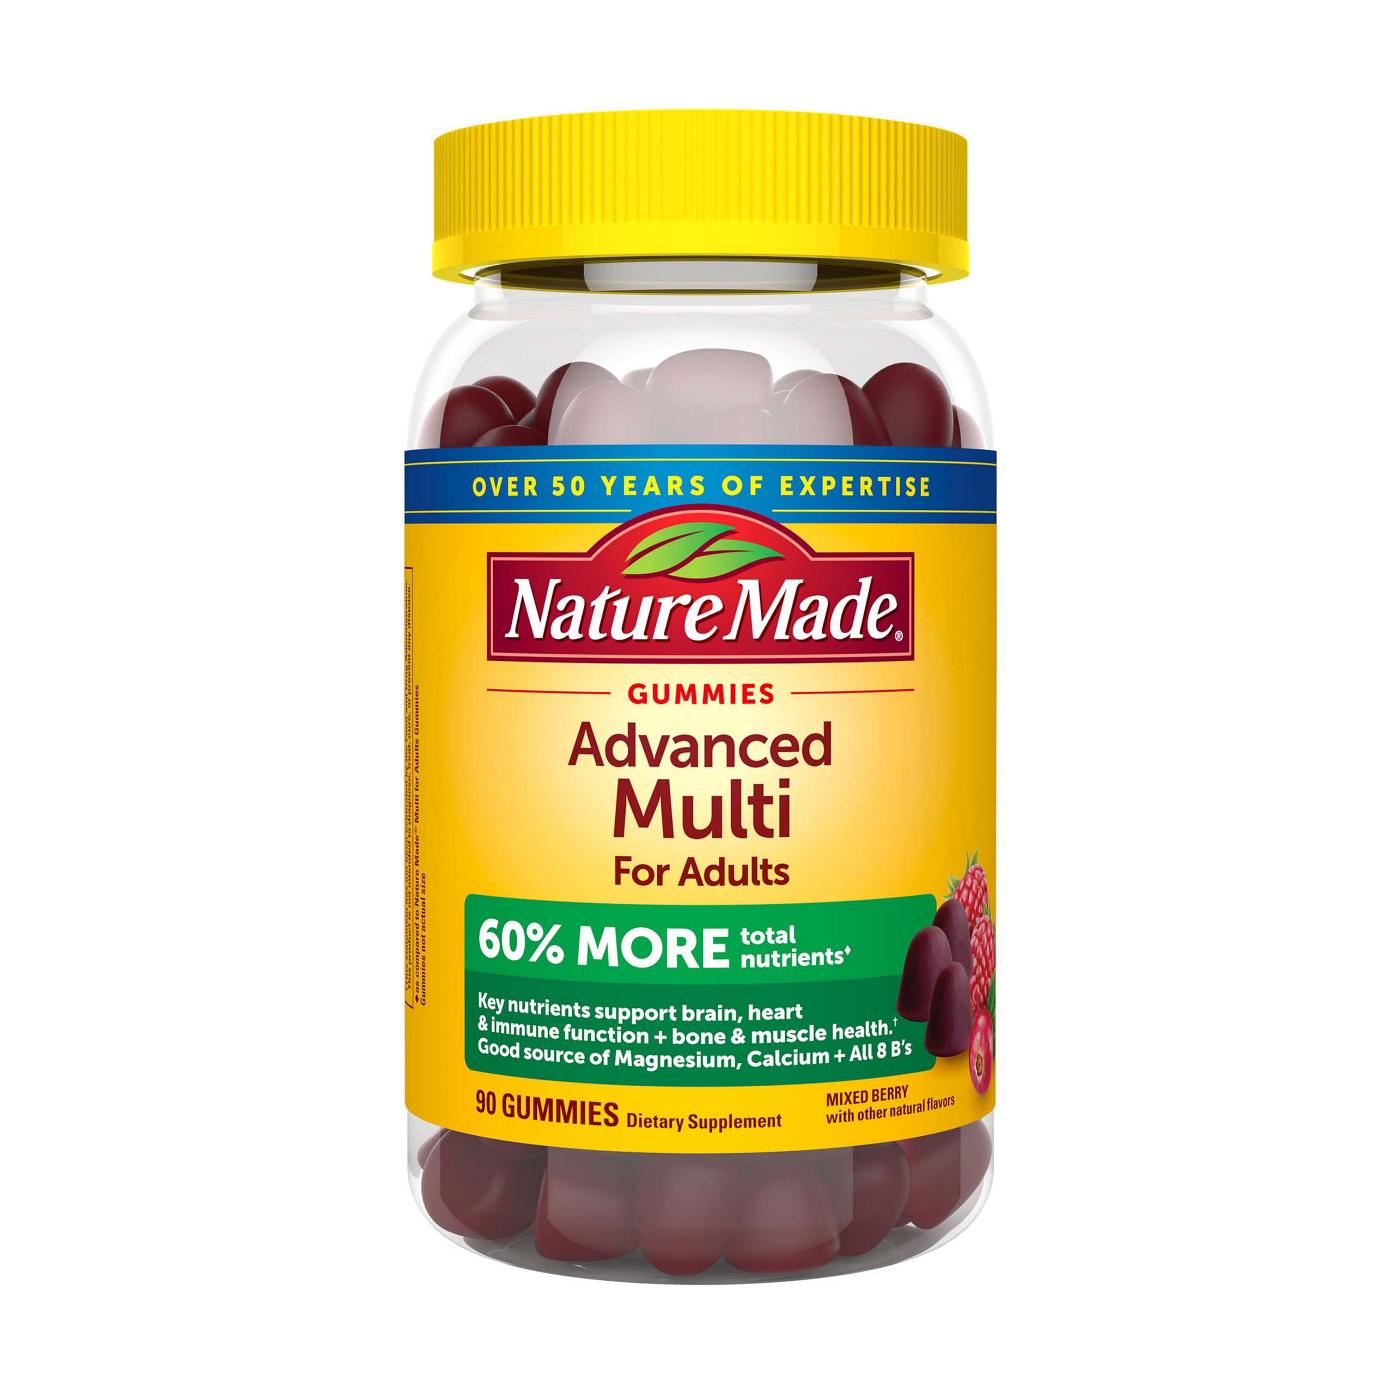 Nature Made Advance Multi For Adults Gummies - Mixed Berry; image 1 of 2